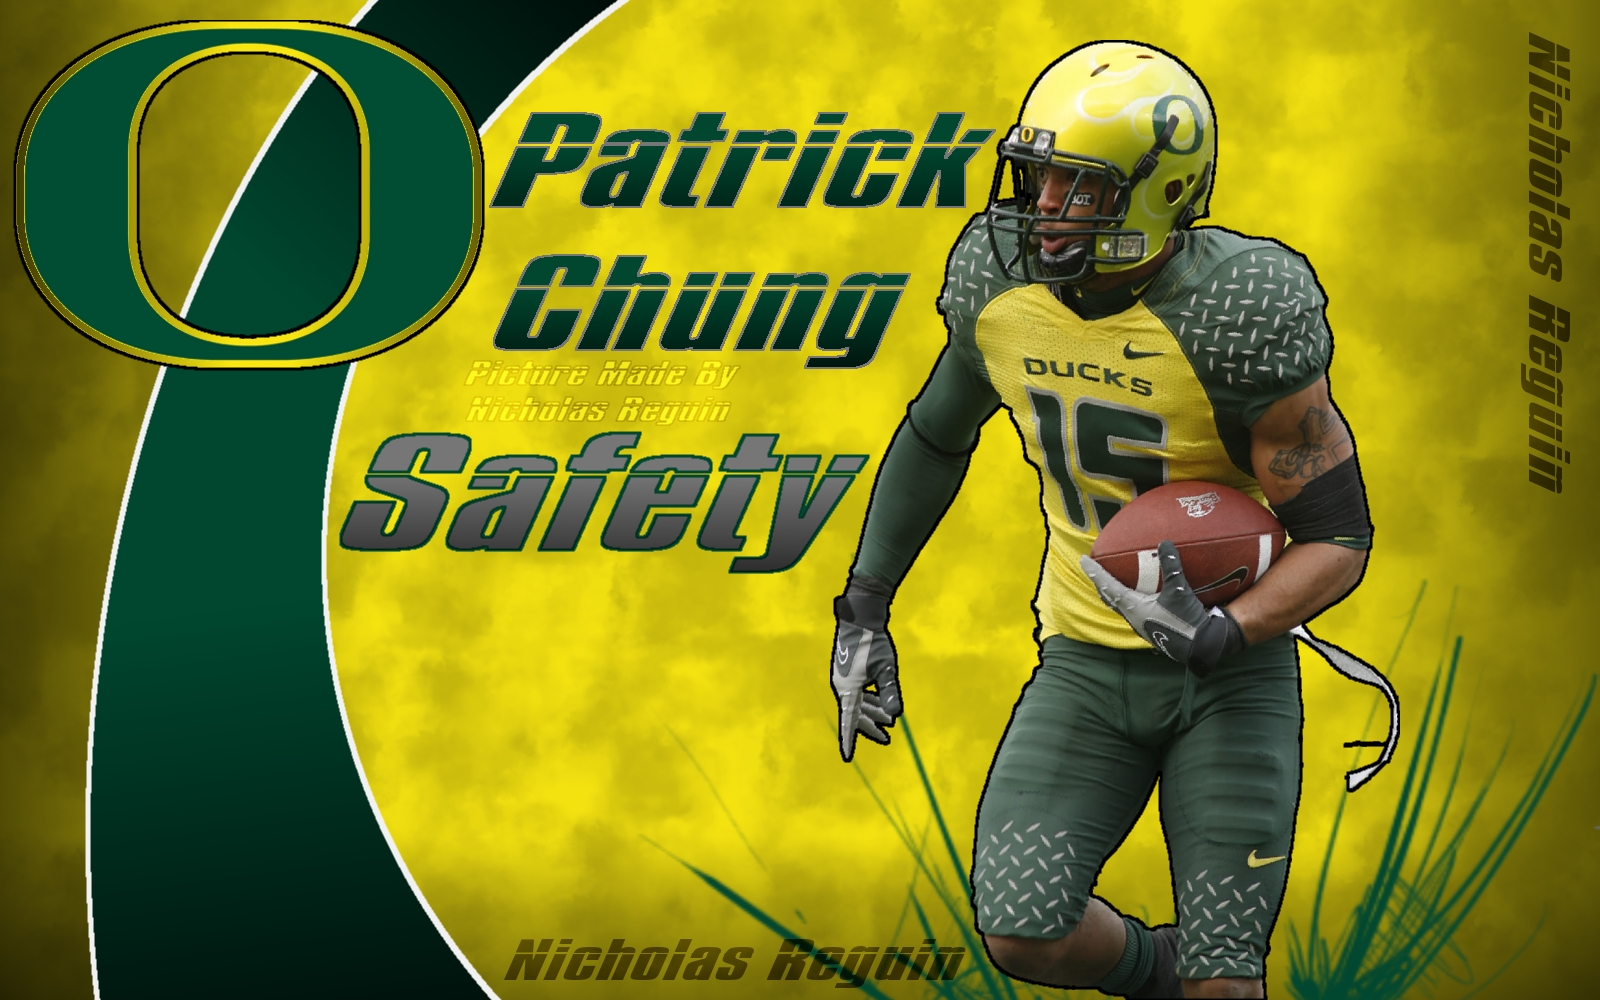 Patrick Chung Oregon Ducks Puter Background By Nicholasreguin On